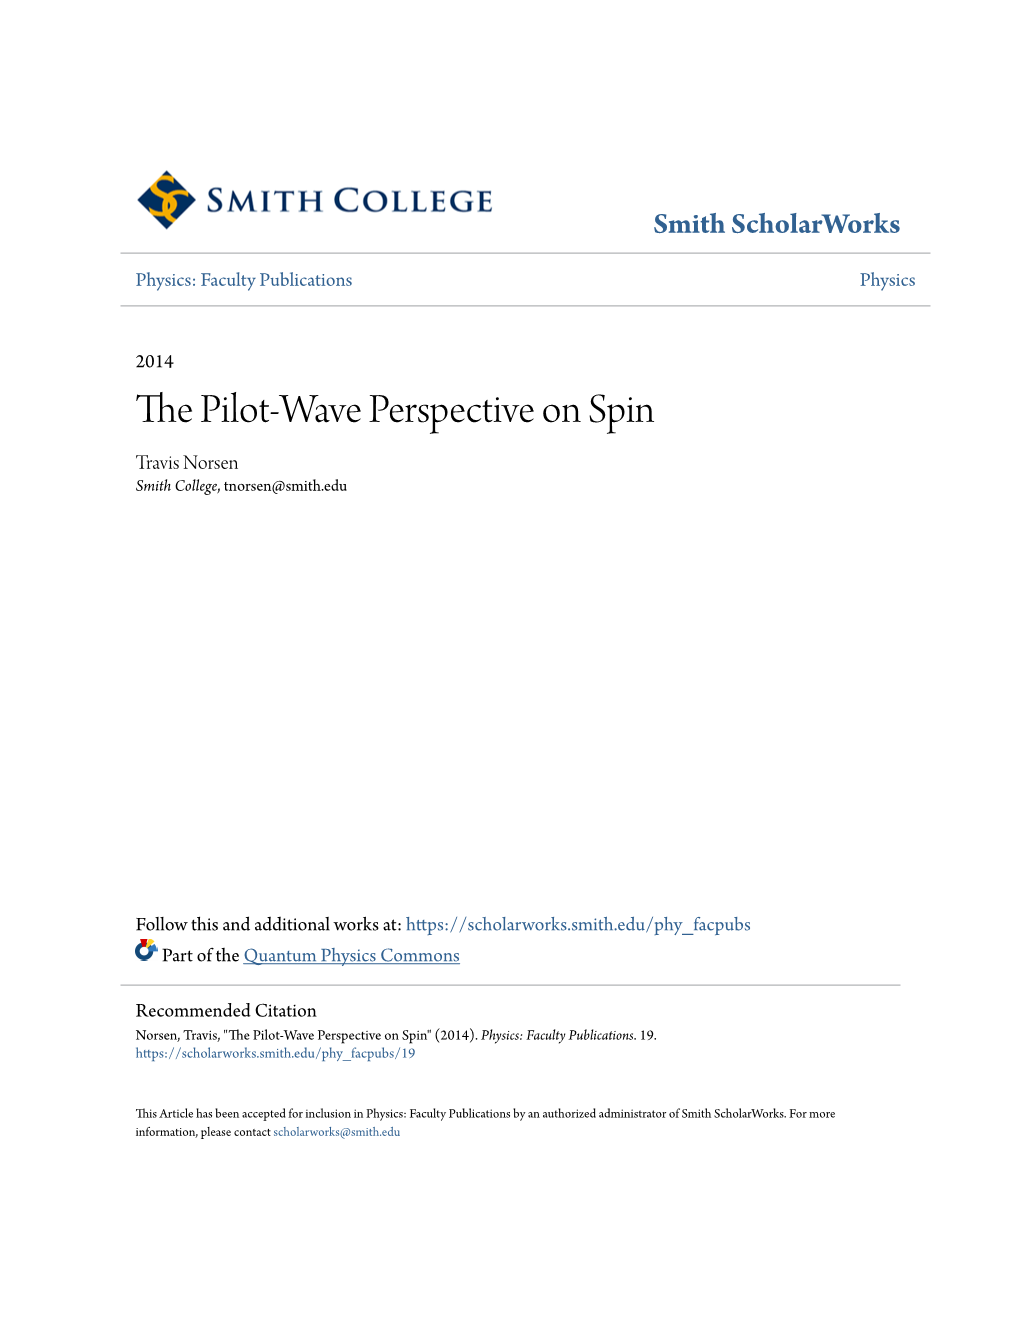 The Pilot-Wave Perspective on Spin